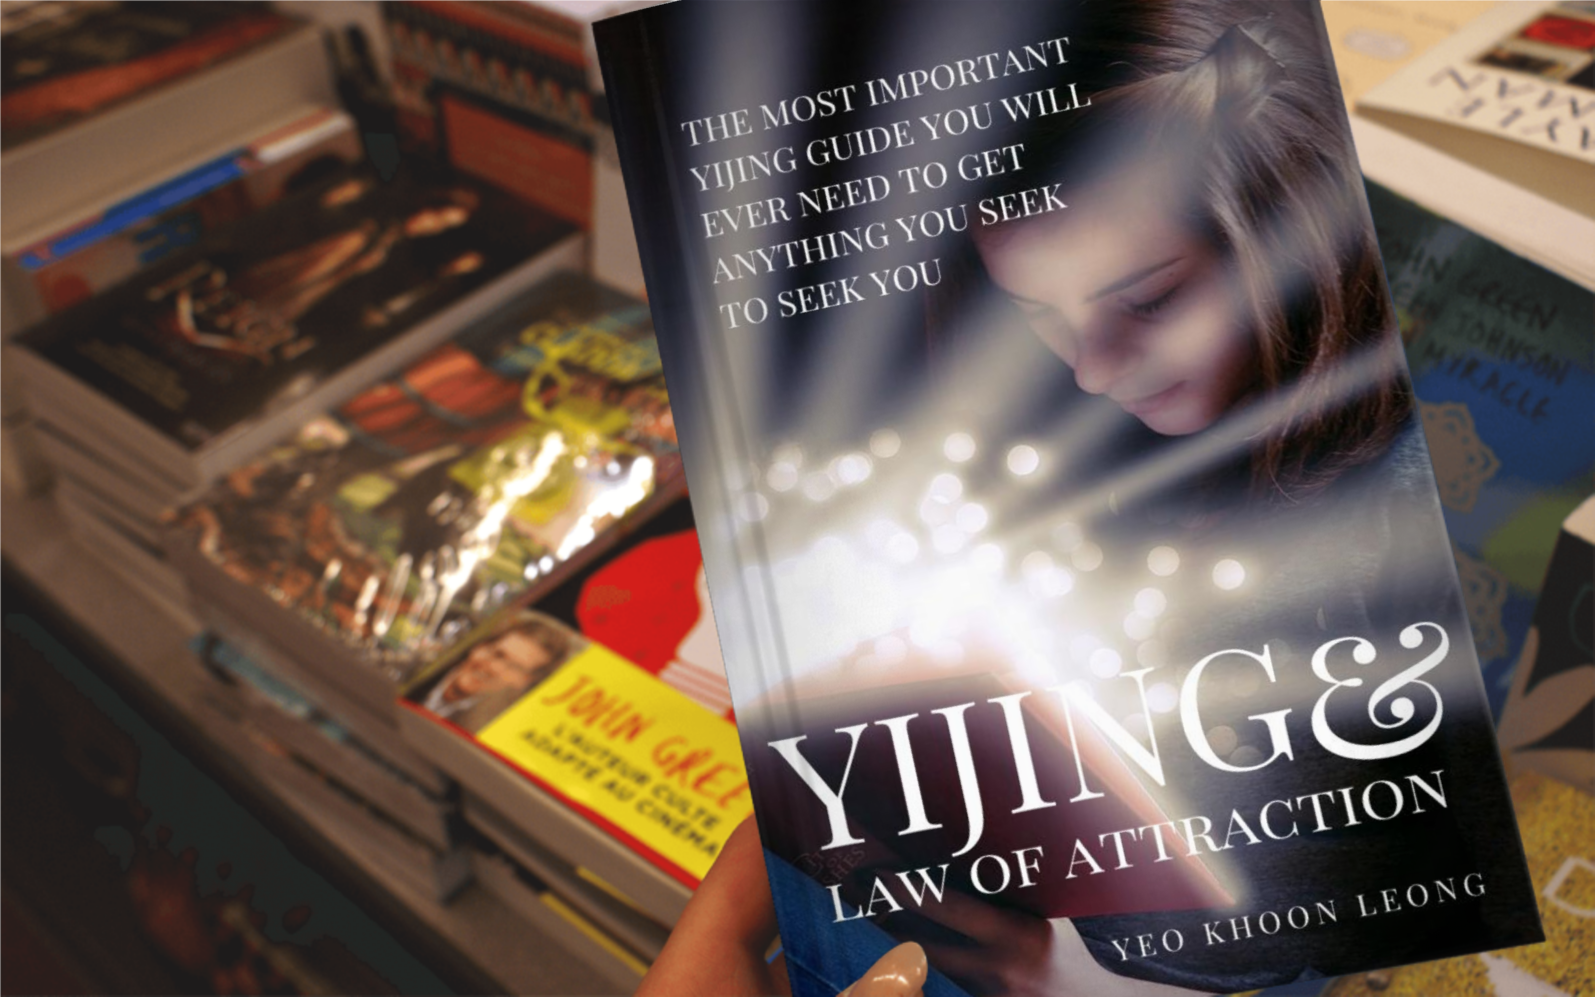 Yijing and Law of Attraction